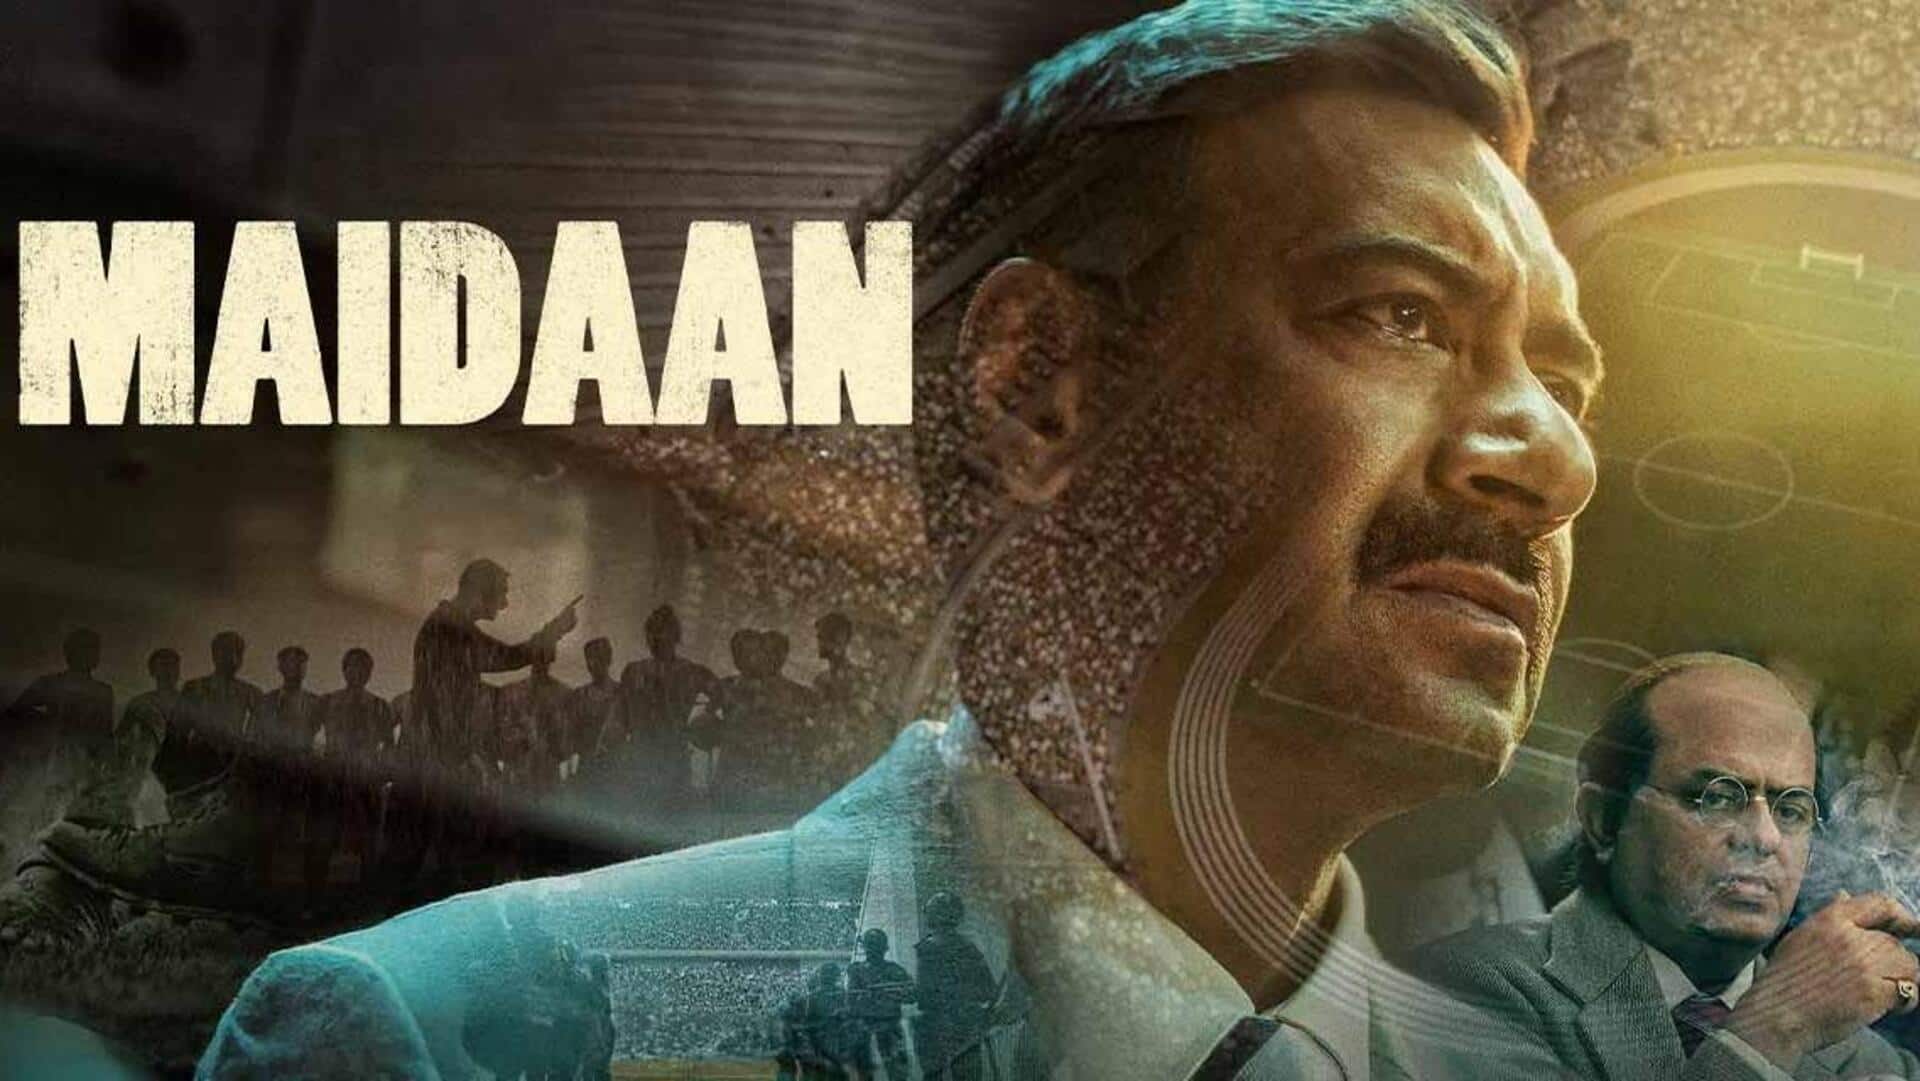 Box office collection: 'Maidaan' experiences slow opening weekend